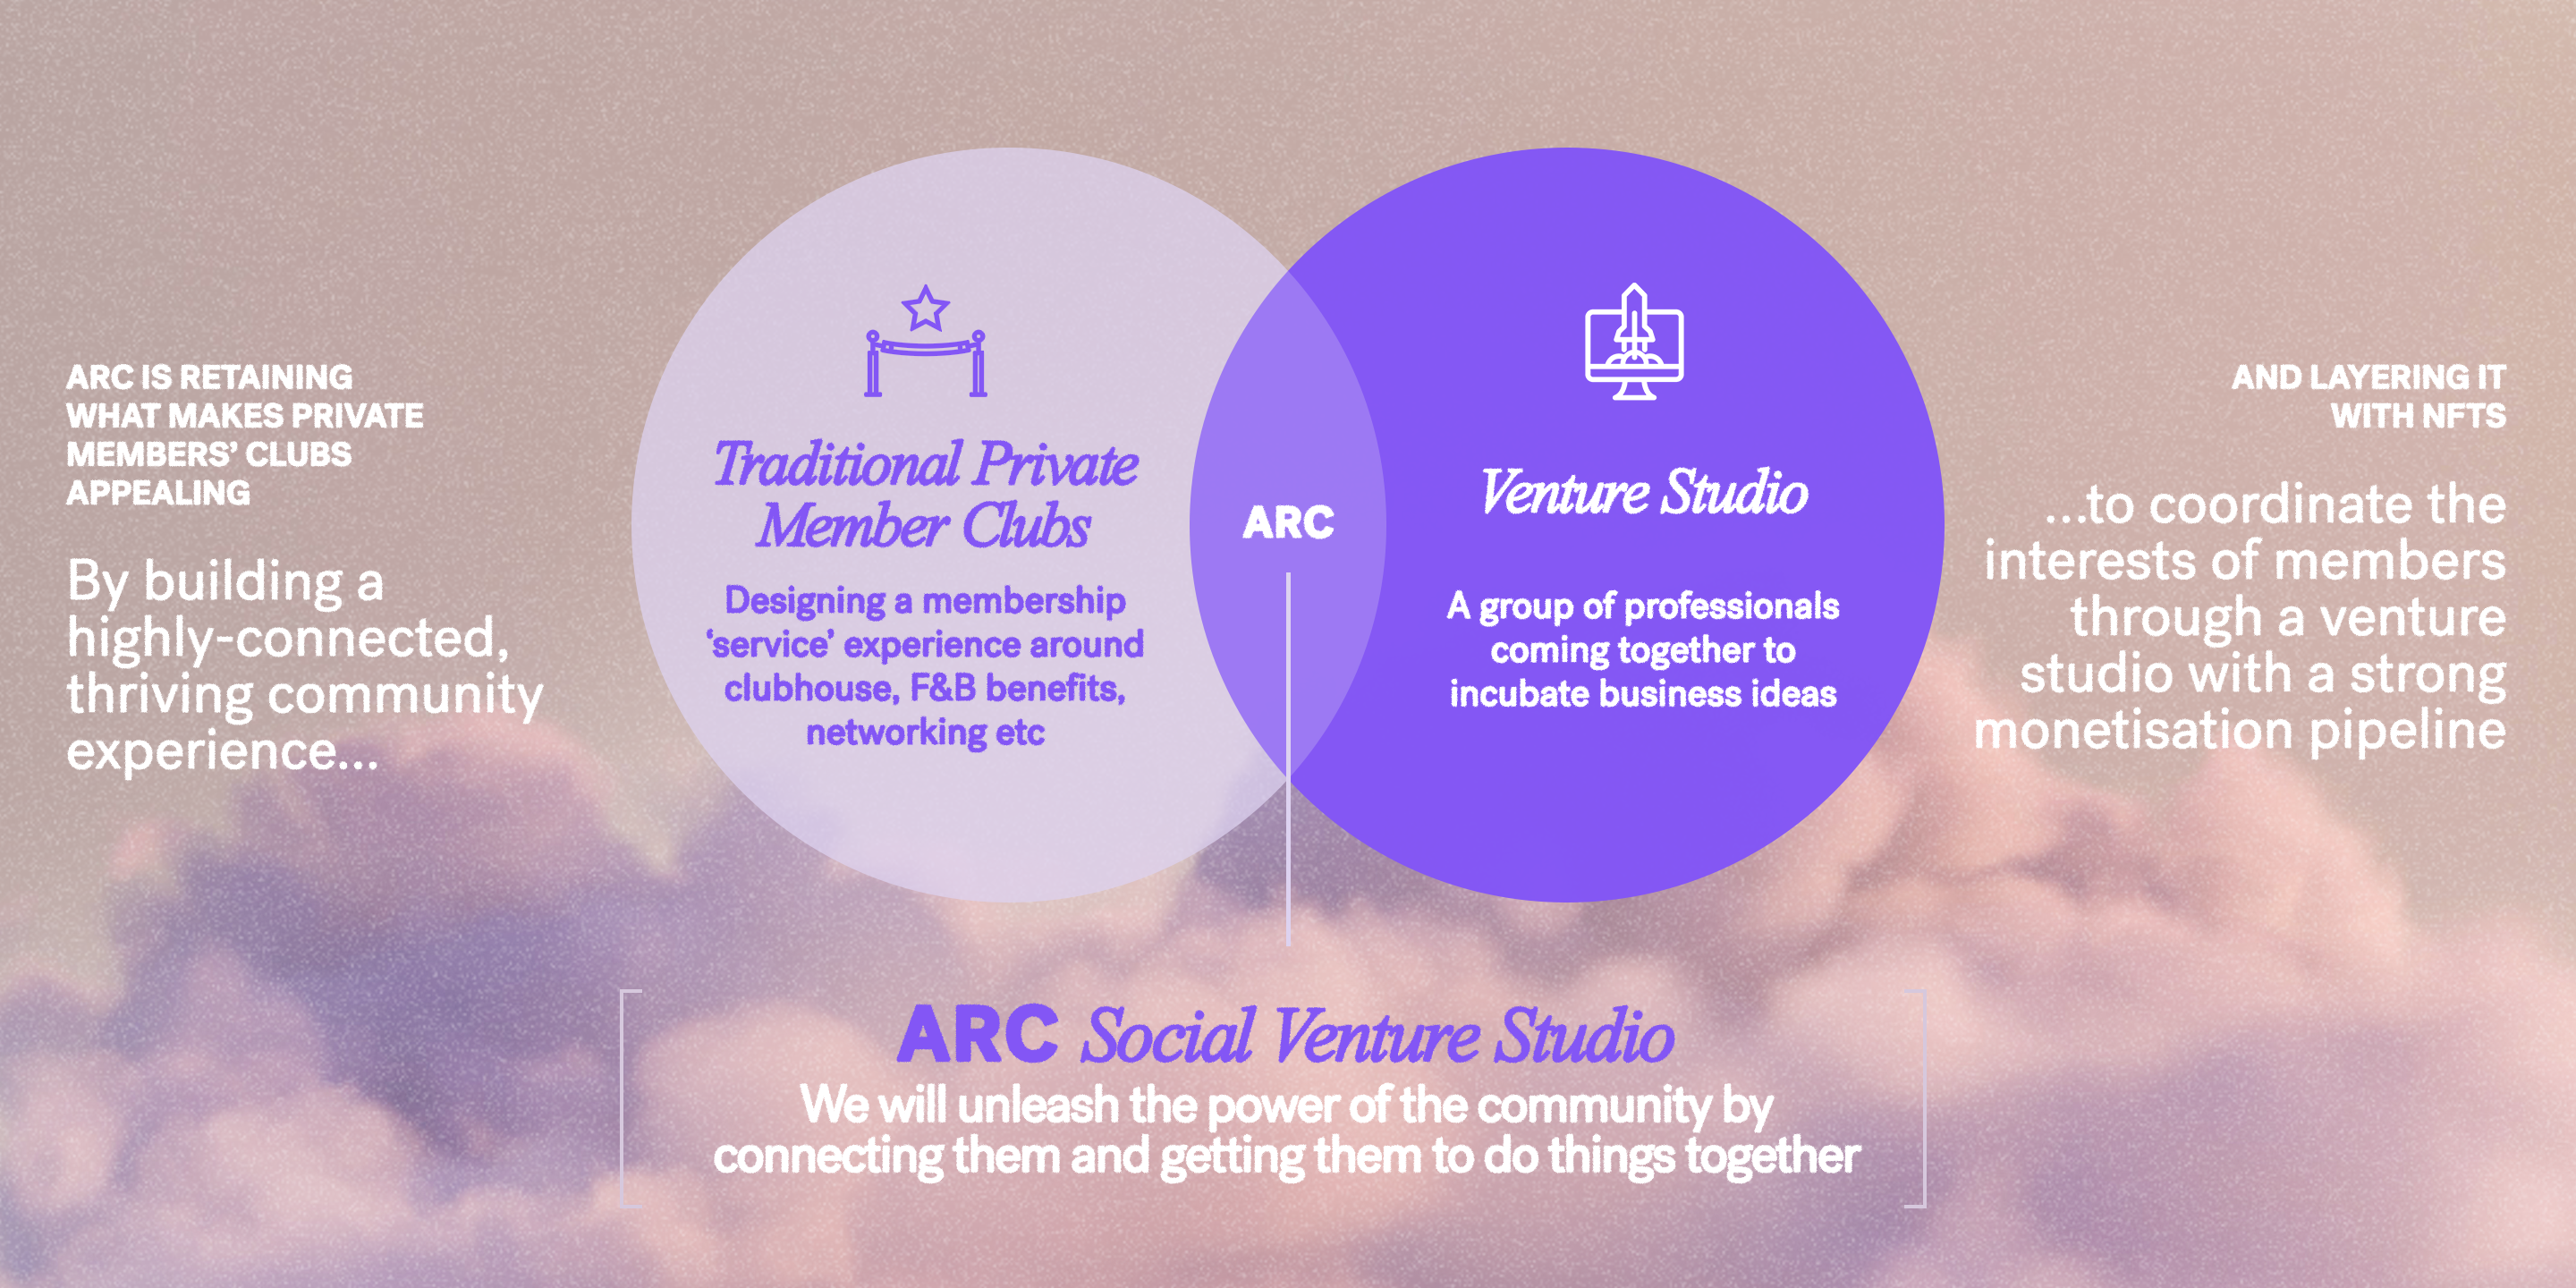 ARC will establish a first-of-its-kind social venture studio that taps on the ideas, talent and resources of the community